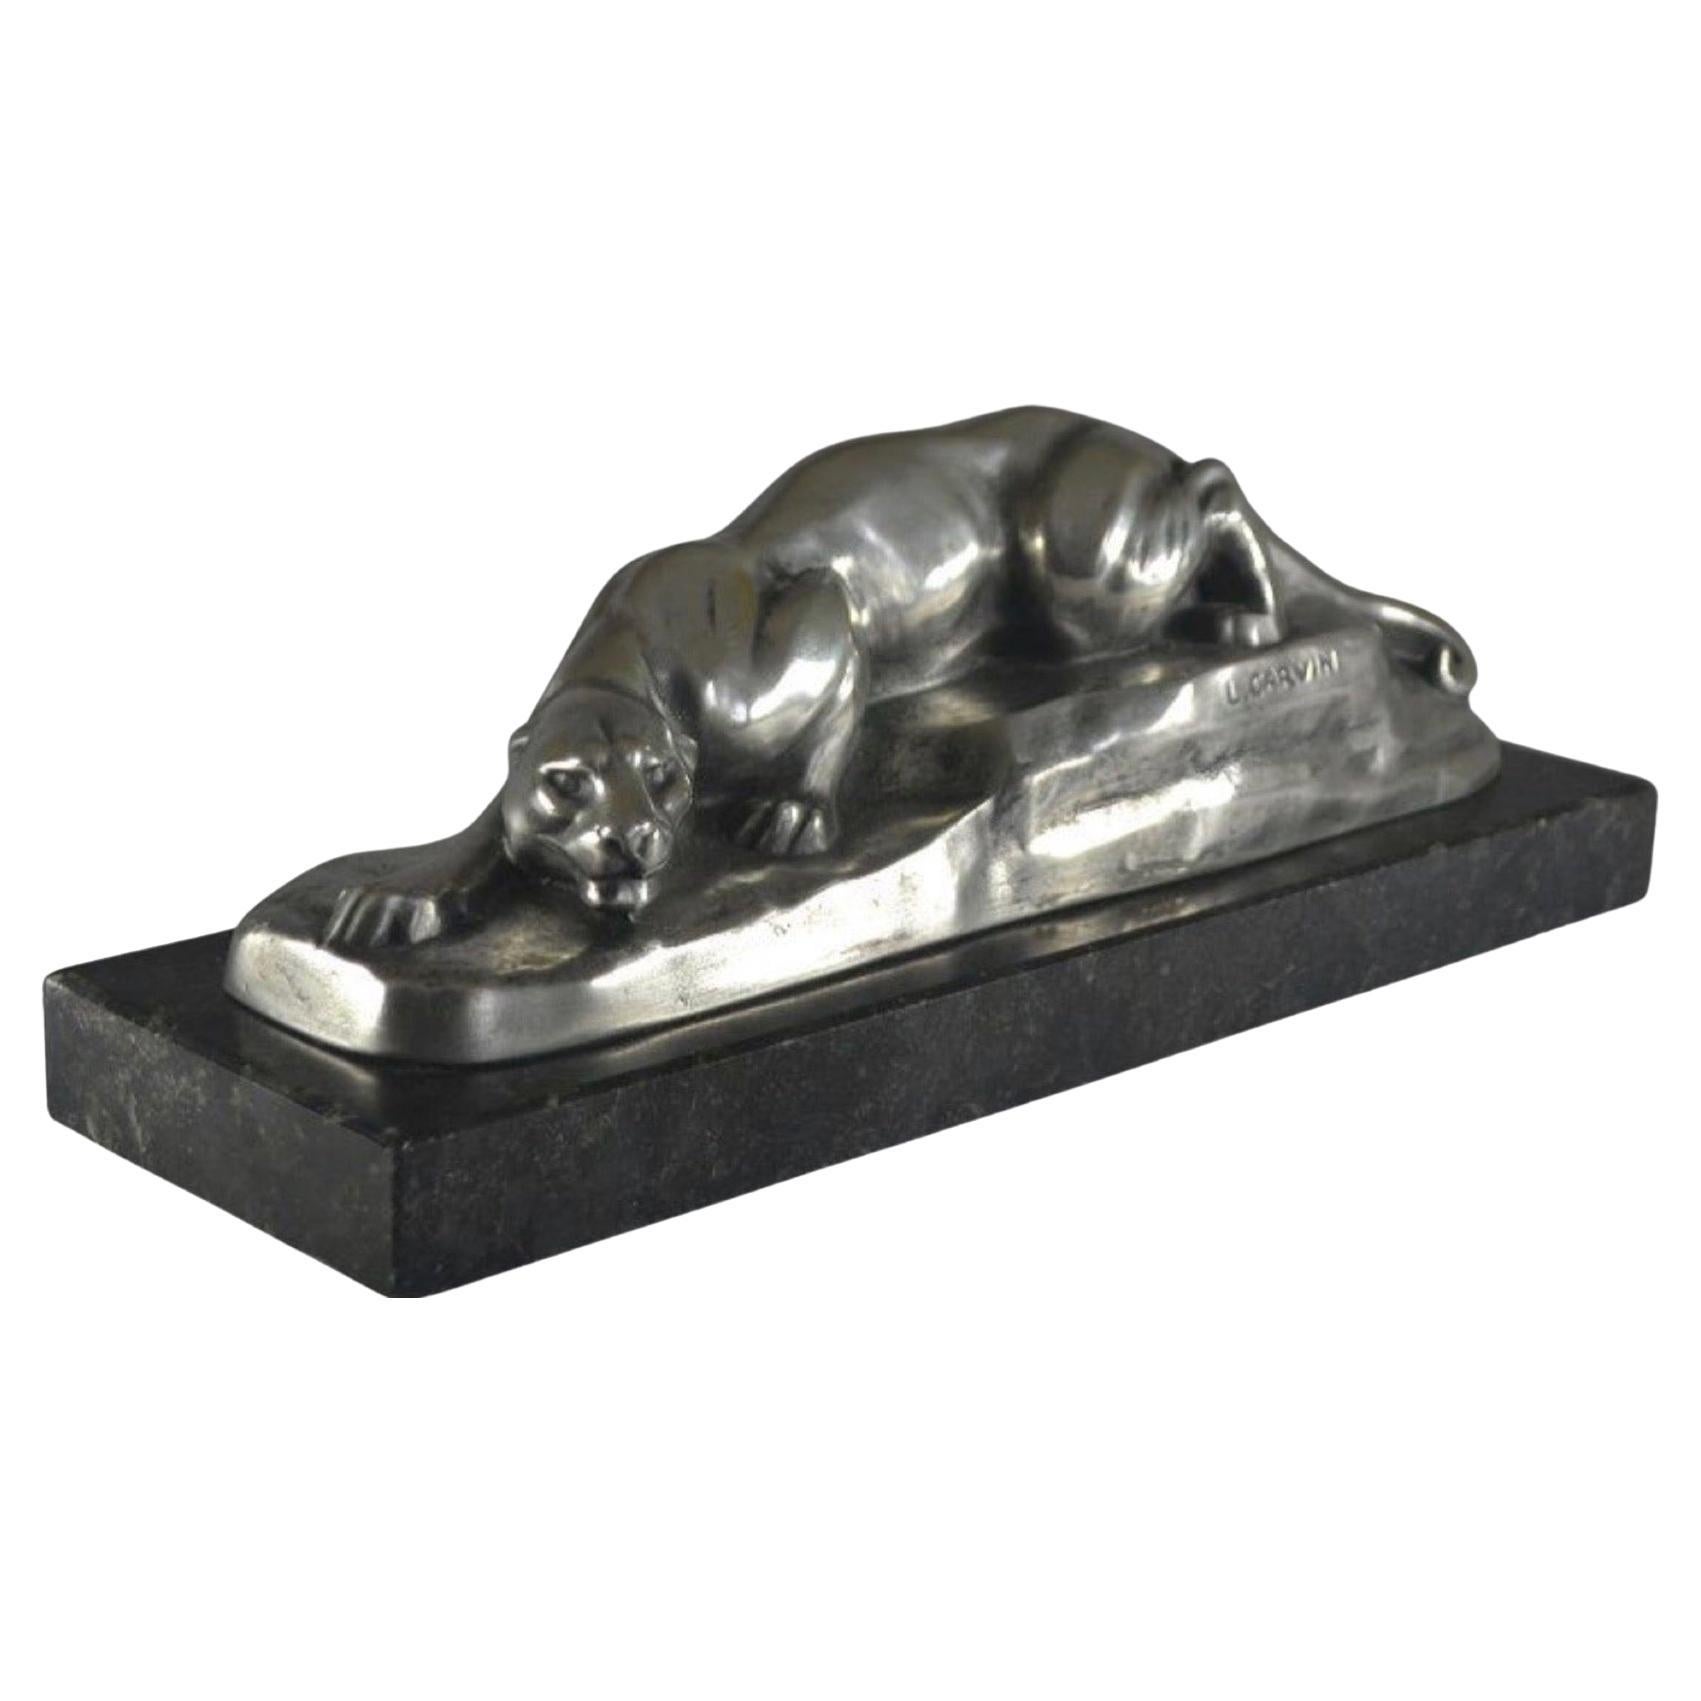 Louis Carvin Cubist Bronze Panther Silver-plated on Marble For Sale